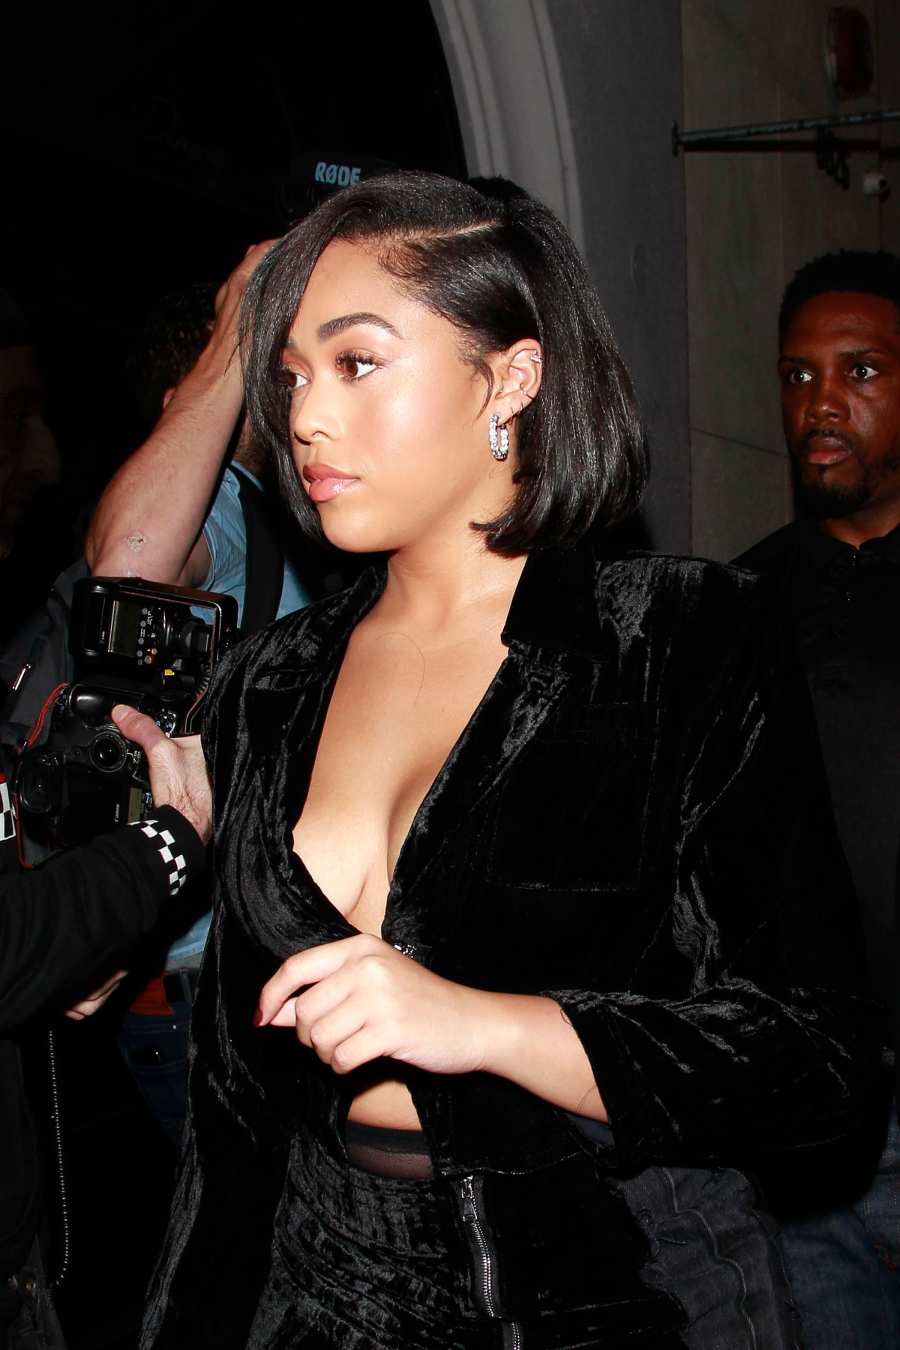 Jordyn Woods 'Walked in Confidently' to Post-Scandal Outing With Mom, Friends